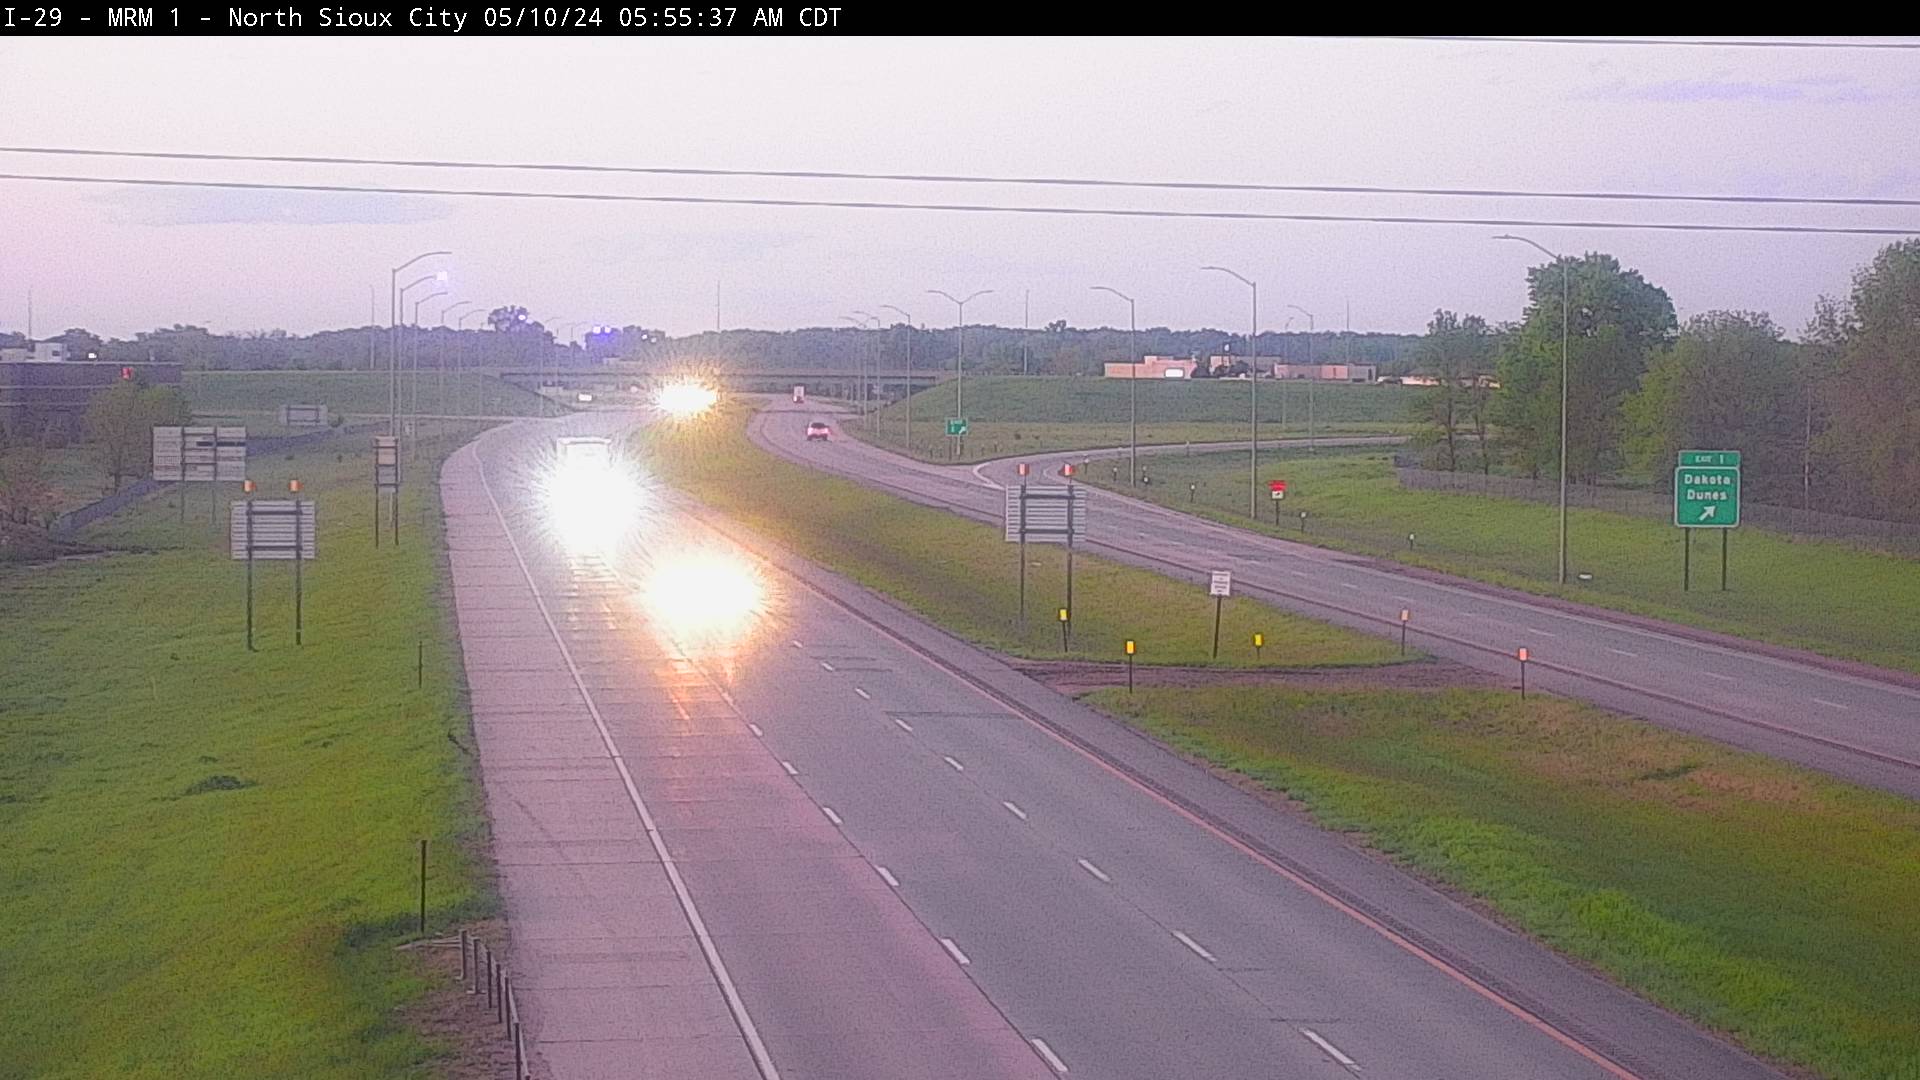 2 miles north of town along I-29 @ MP 2 - South Traffic Camera